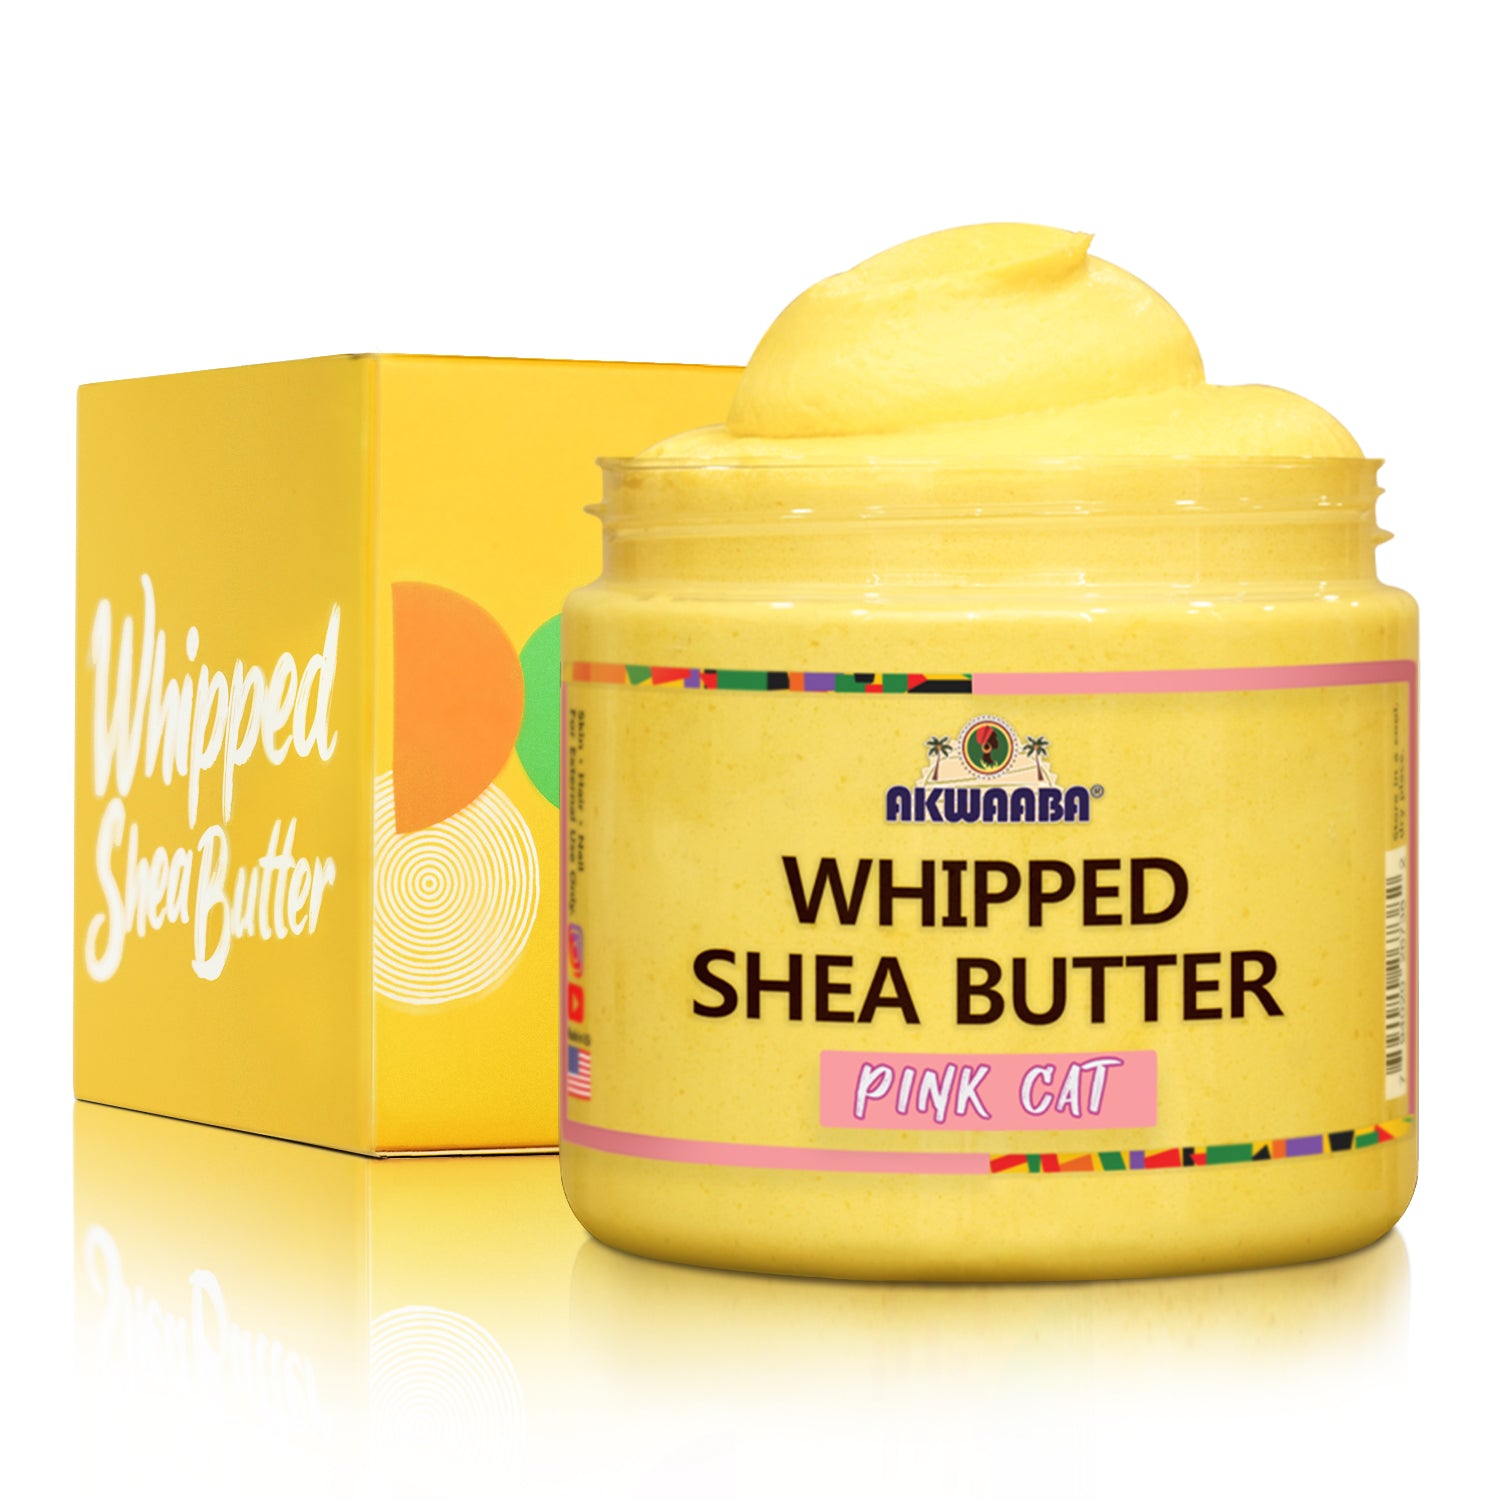 Whipped Shea Butter (Pink Cat) - 12 oz.